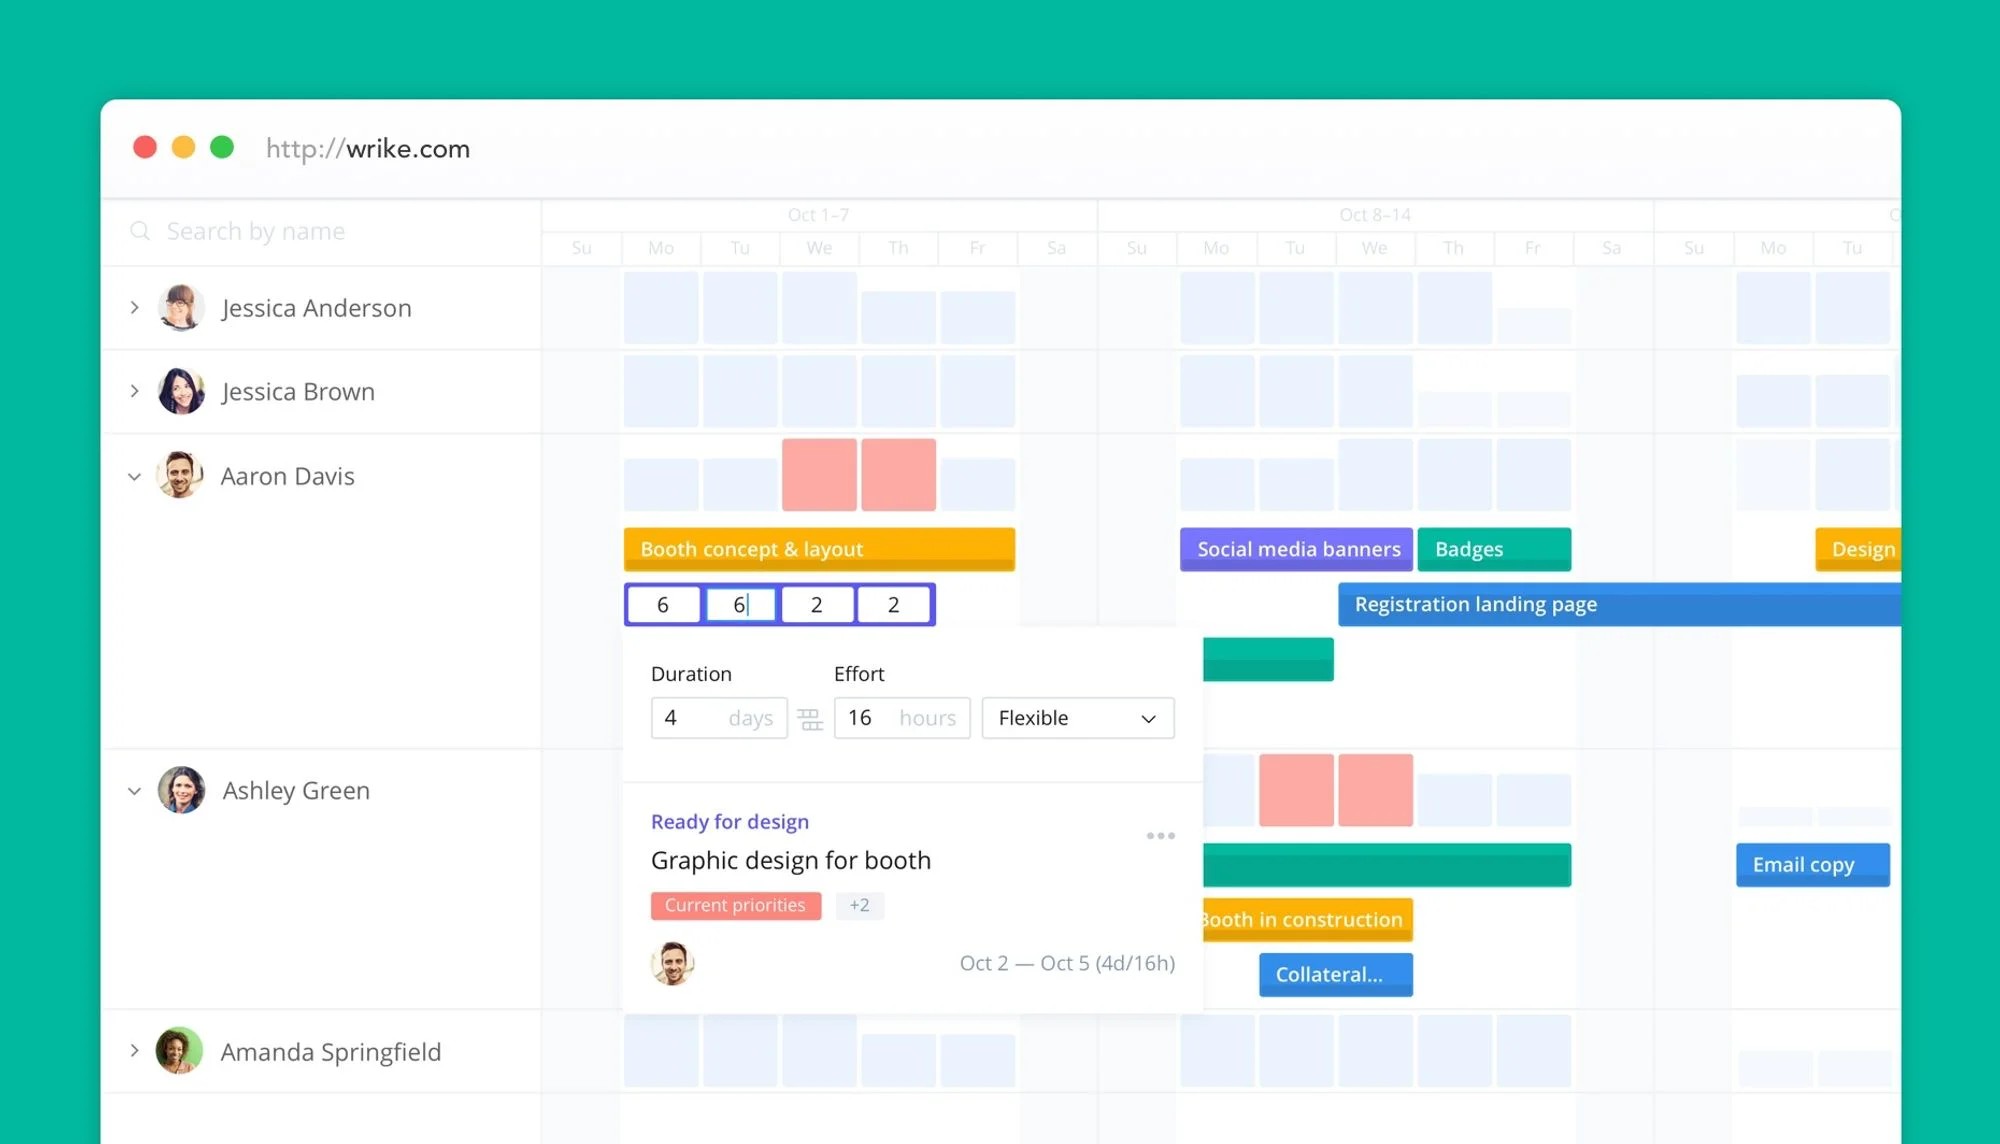 Wrike - The new player on the block when it comes to project management